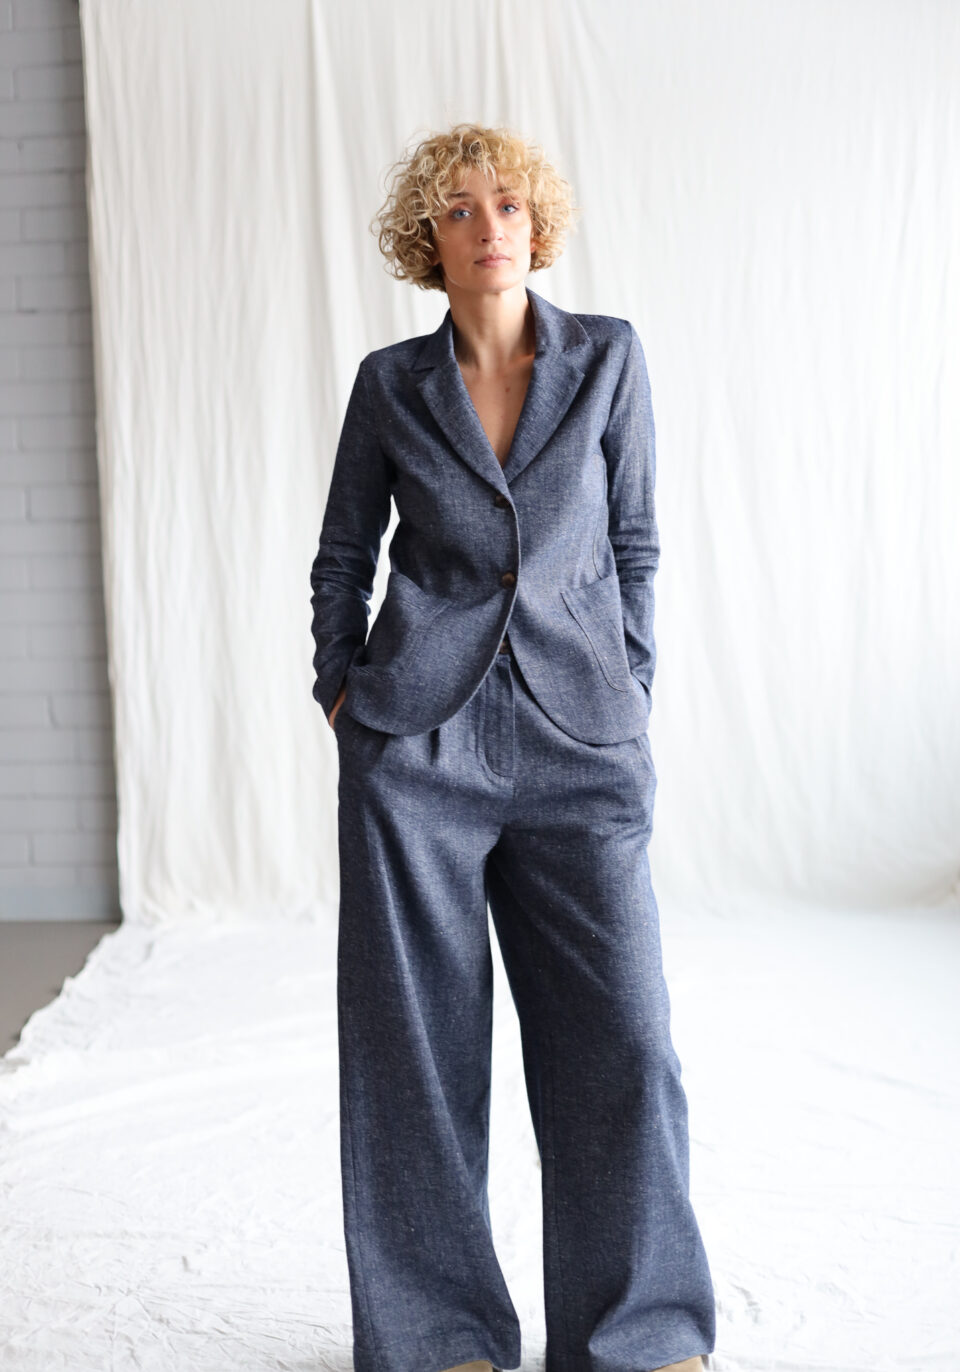 Fitted silhouette elegant linen and wool blazer | Jacket | Sustainable clothing | OffOn clothing